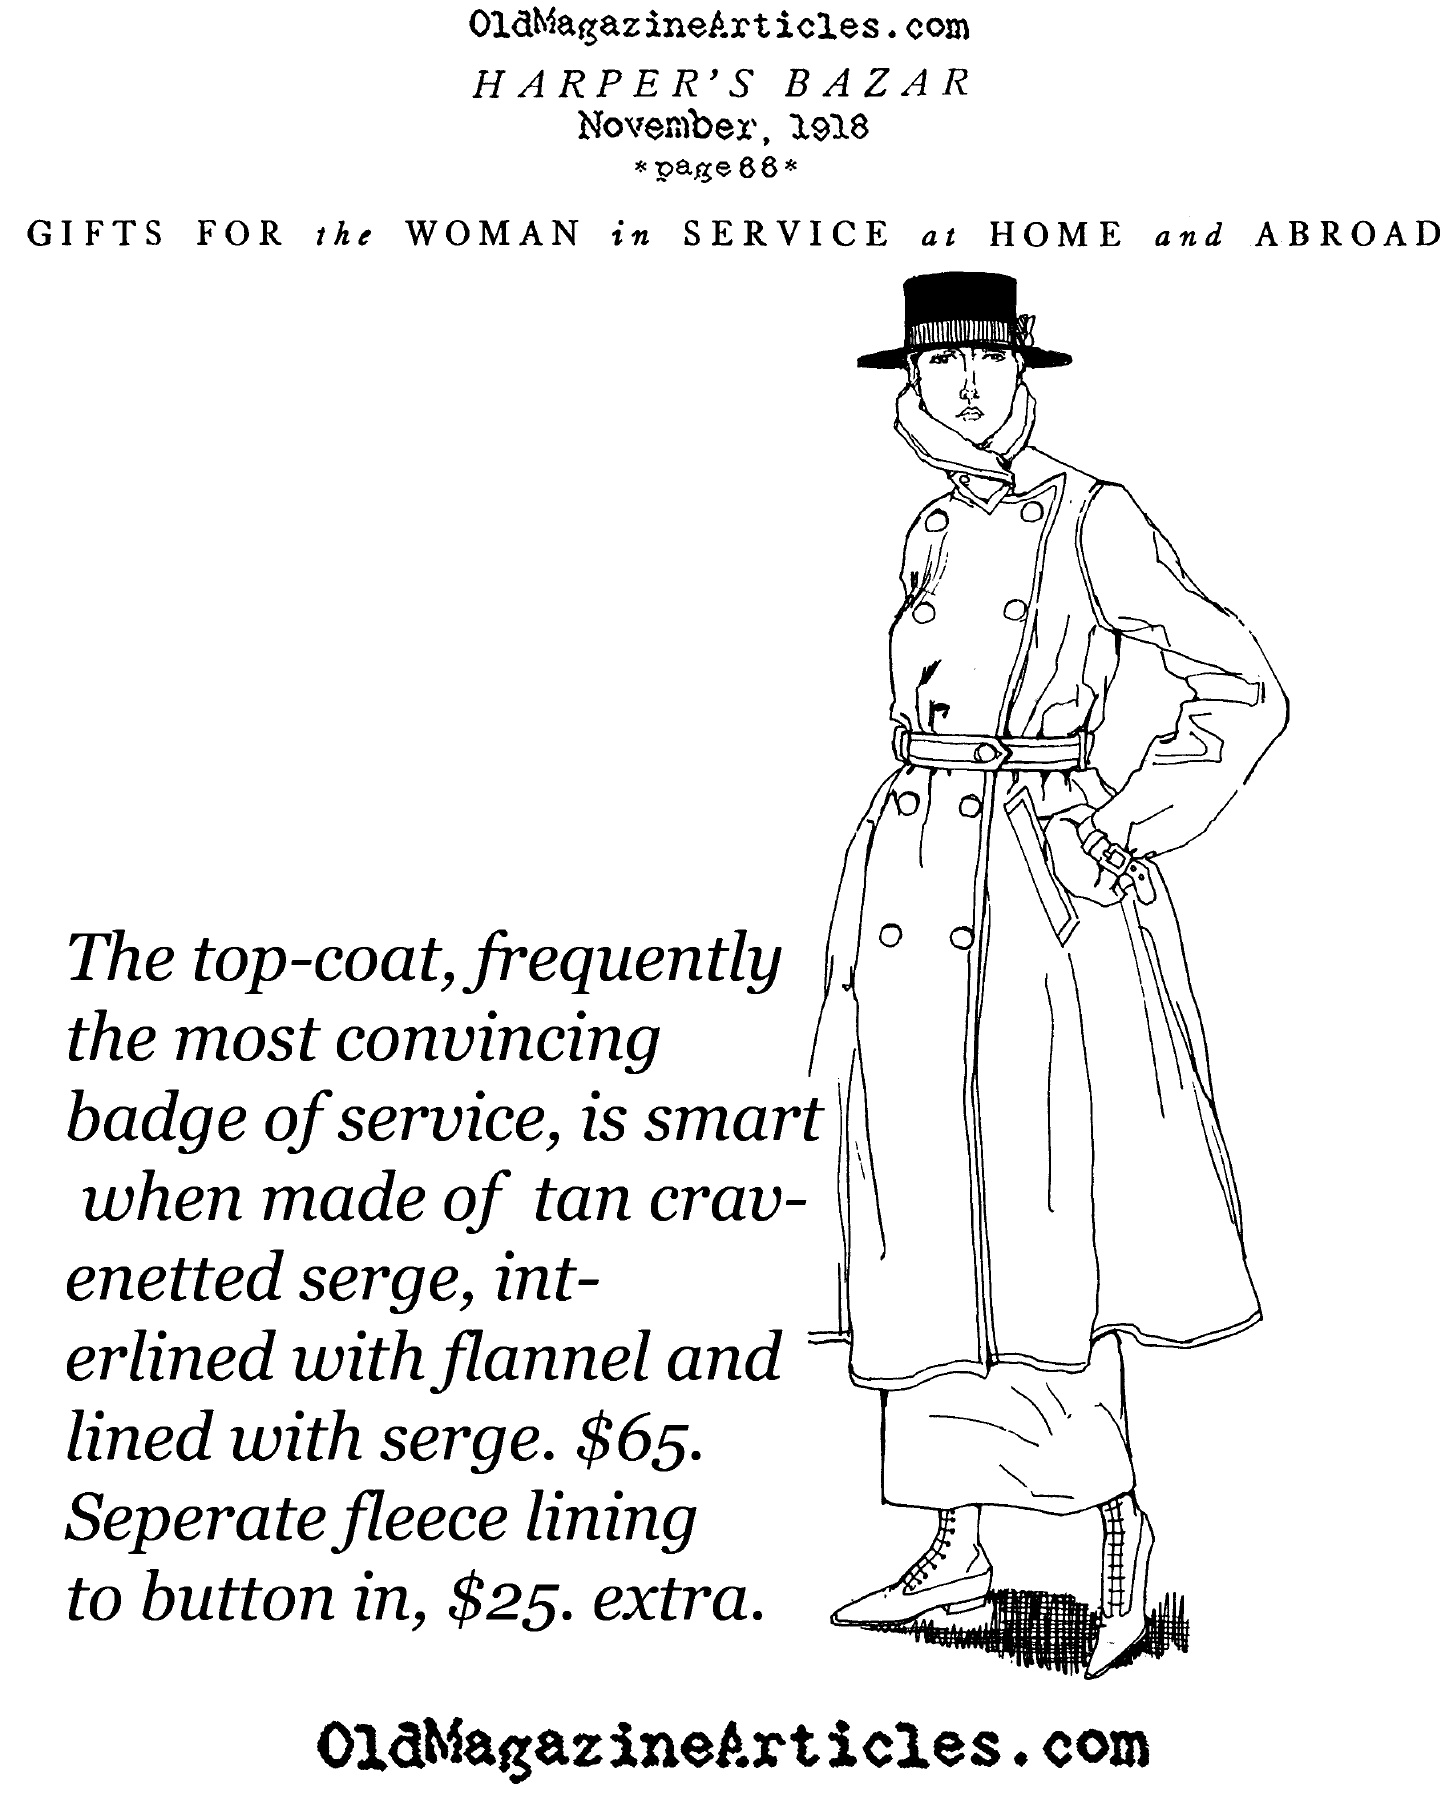 A Trench Coat for the Fashionable Ladies (Harper's Bazaar, 1918)